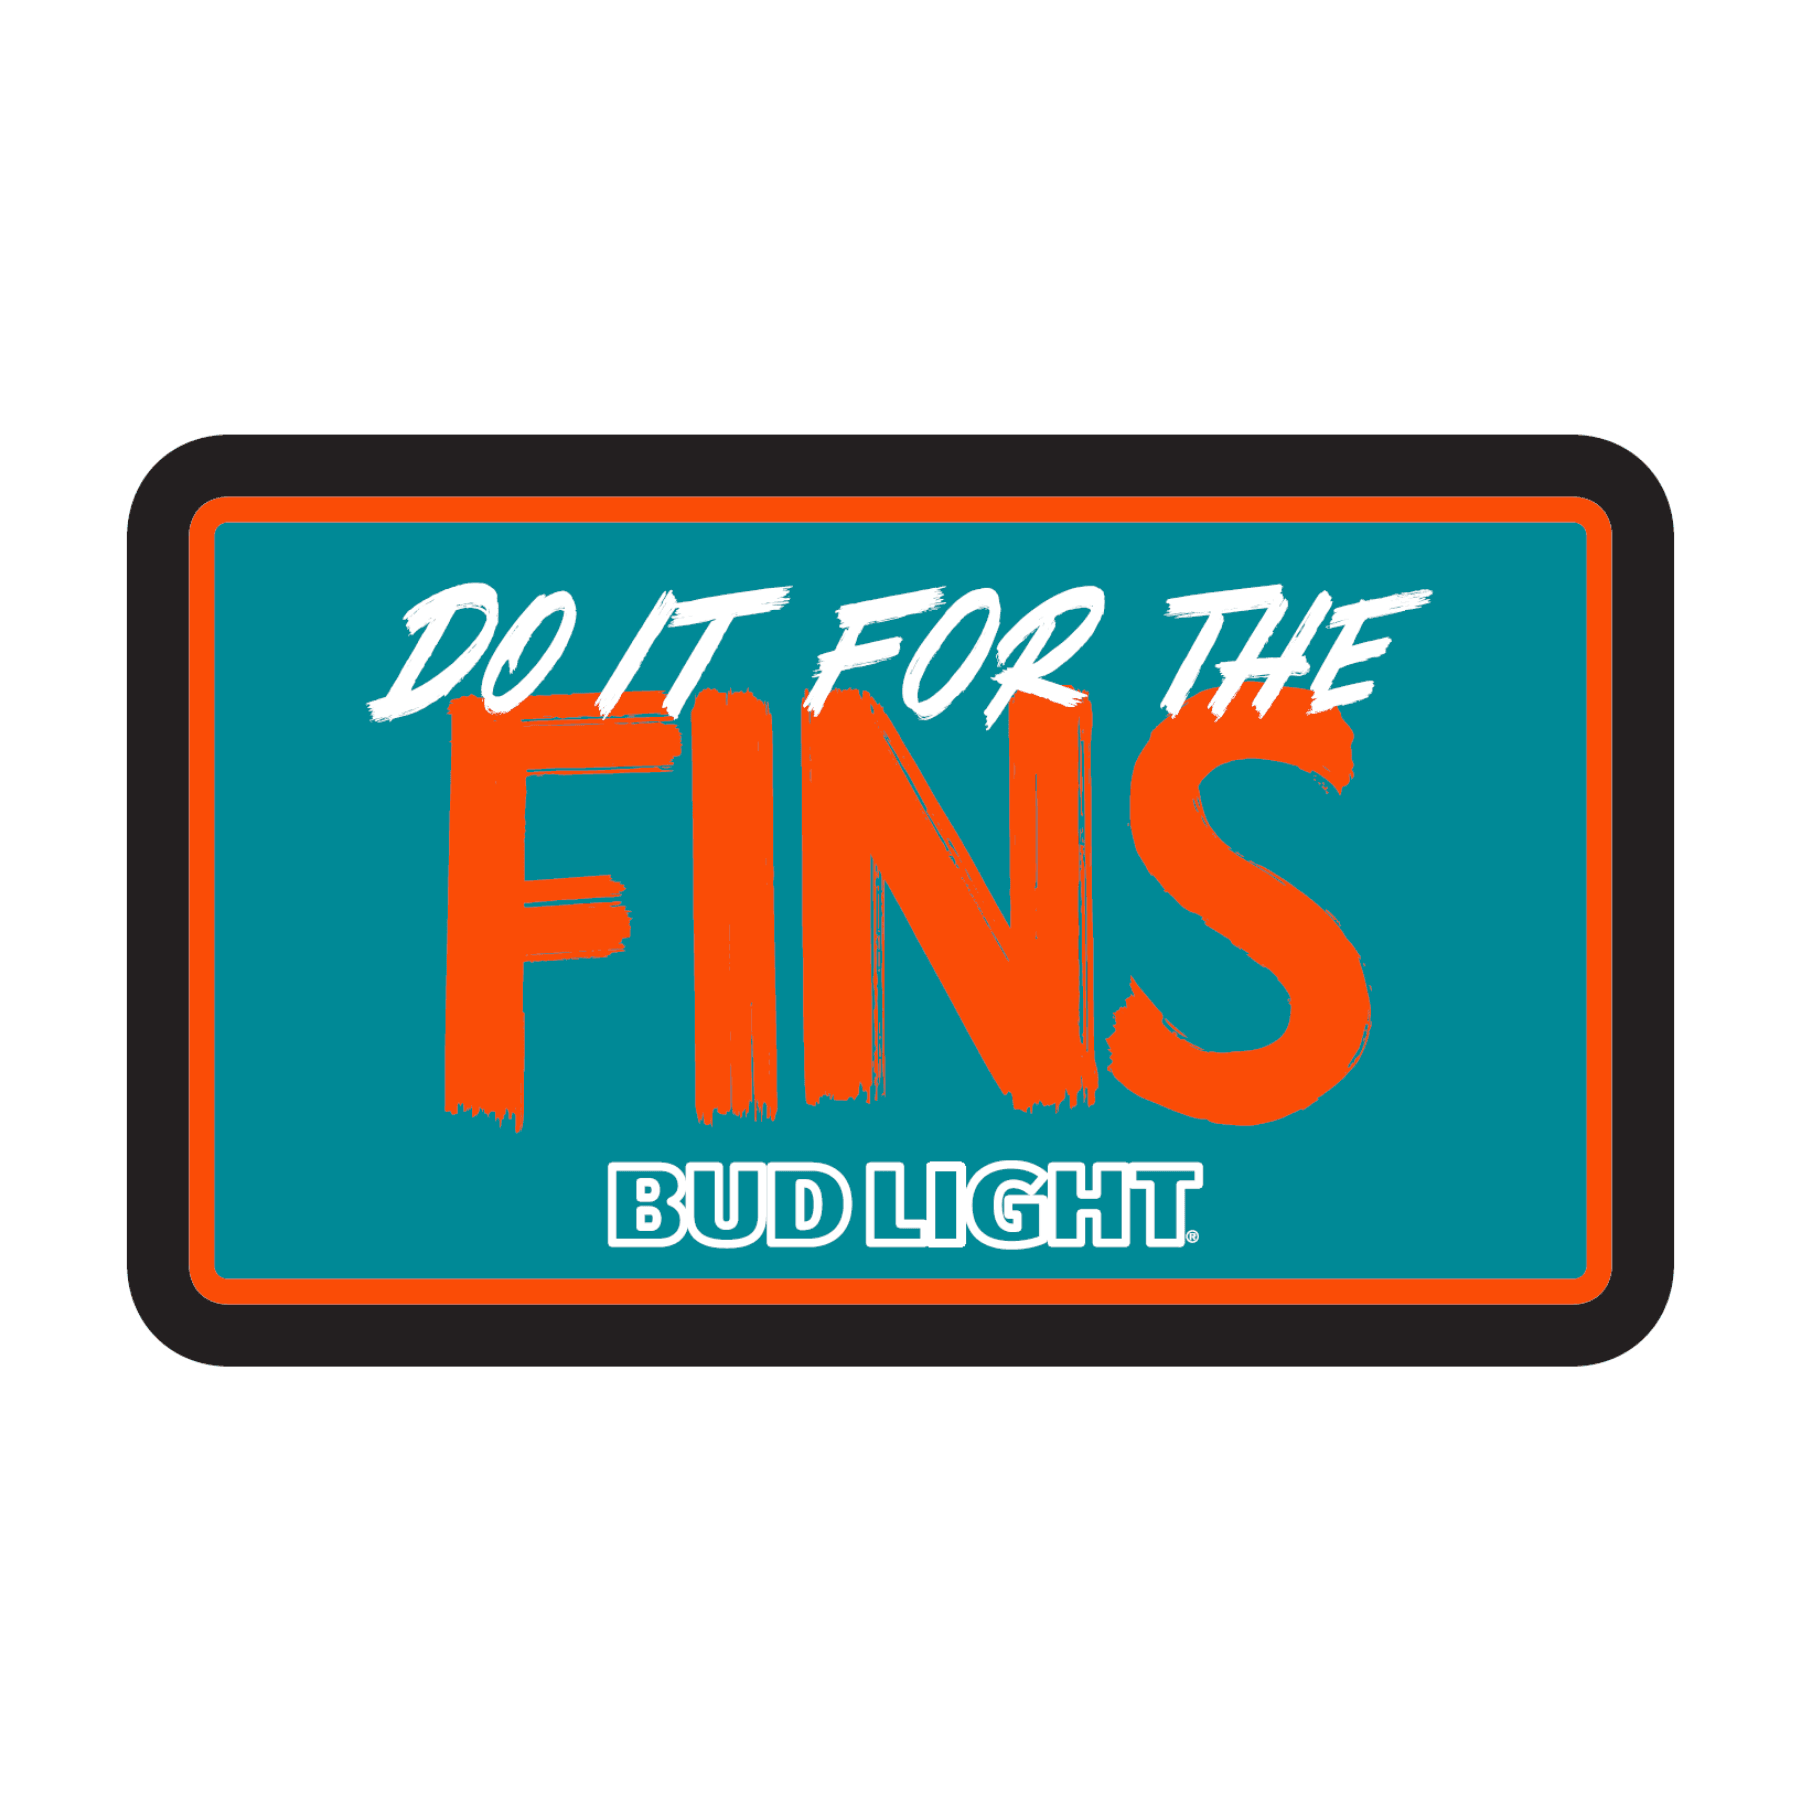 Bud Light Miami Dolphins license plate panel led that reads Do It For The Fins and Bud Light under